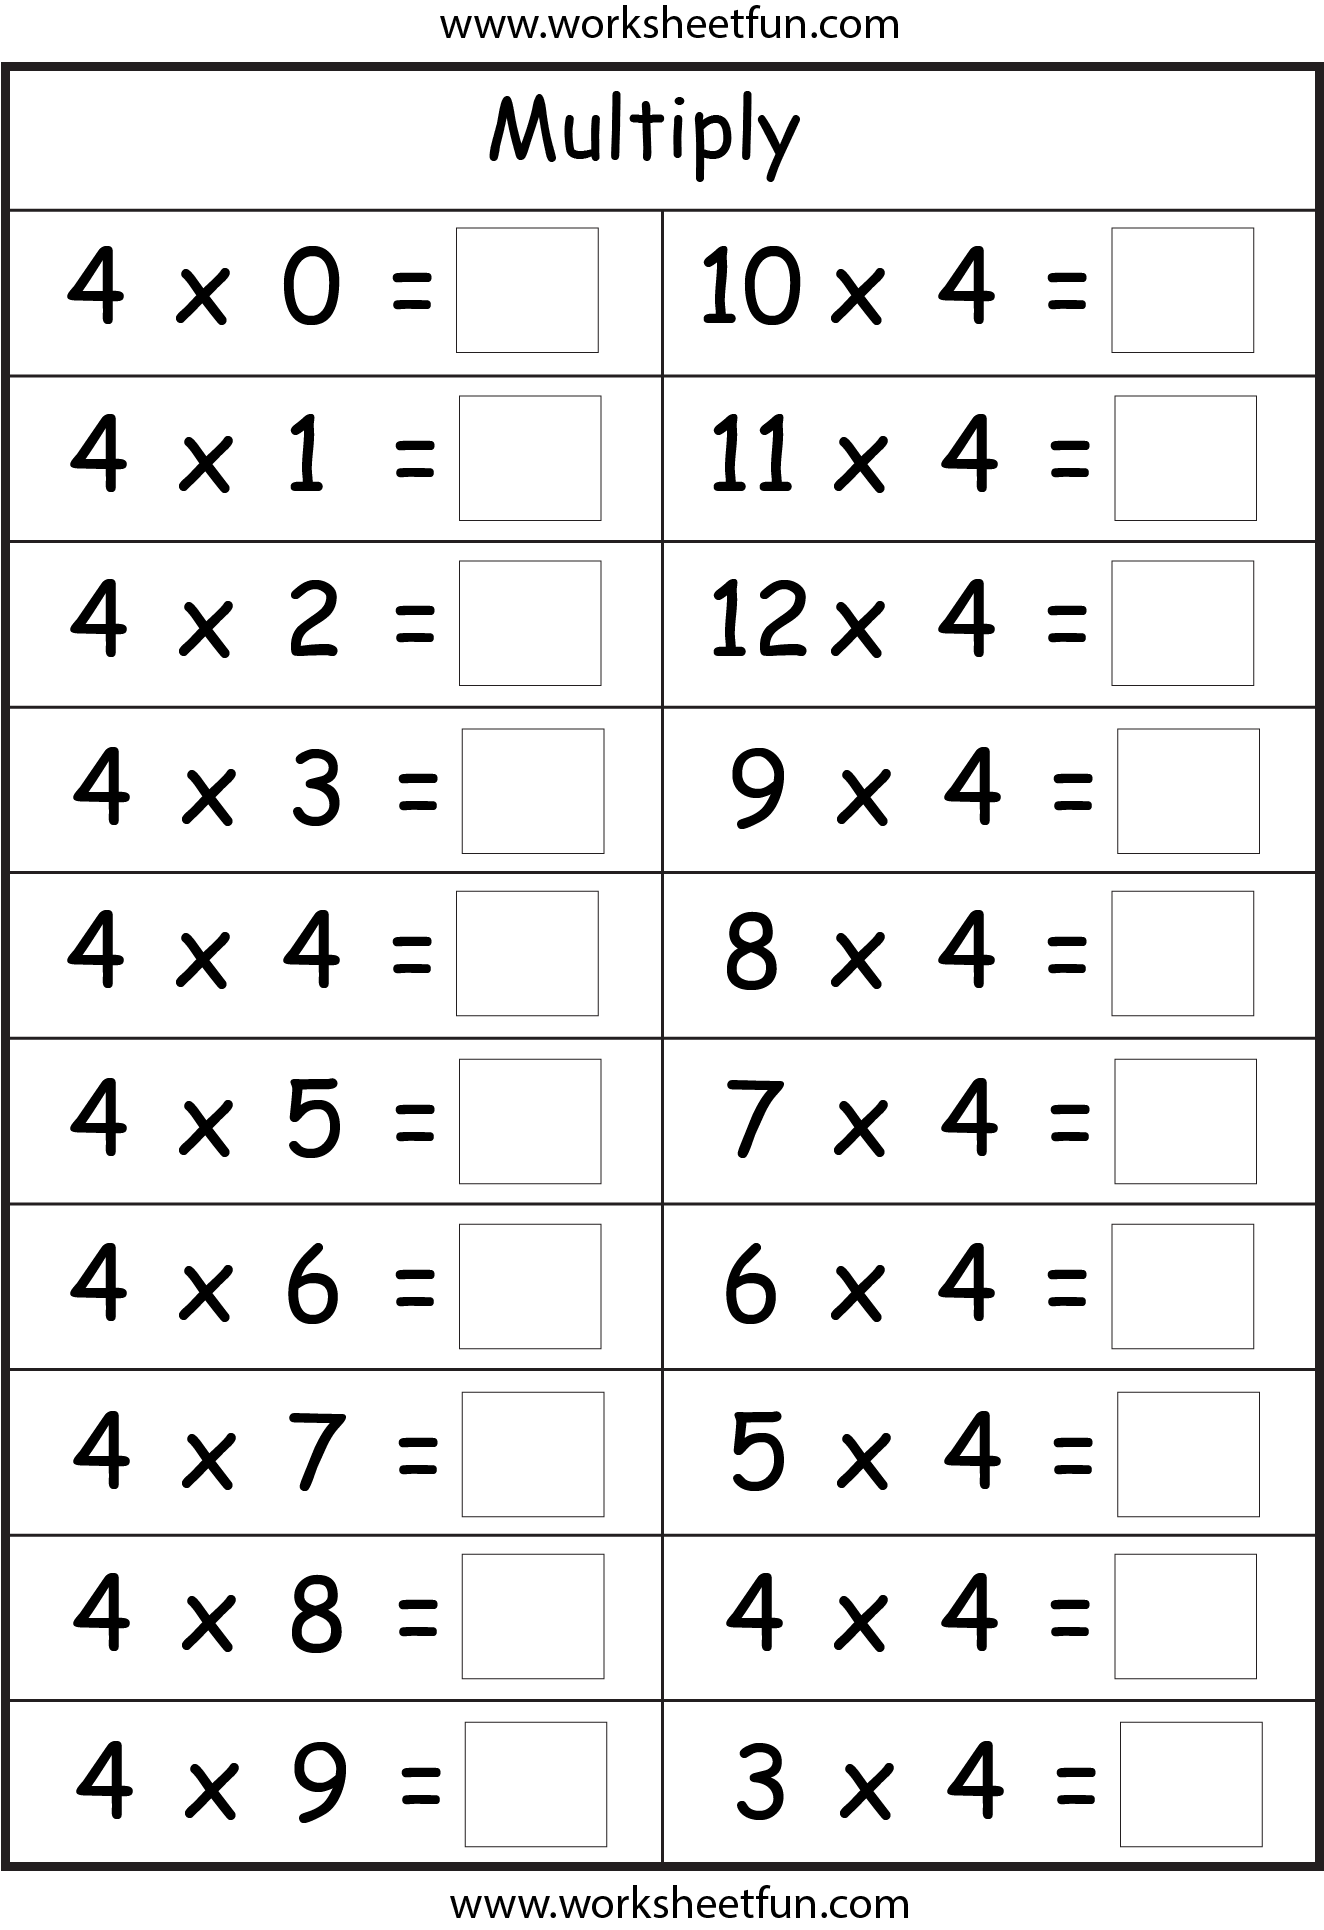 multiplication-basic-facts-2-3-4-5-6-7-8-9-times-tables